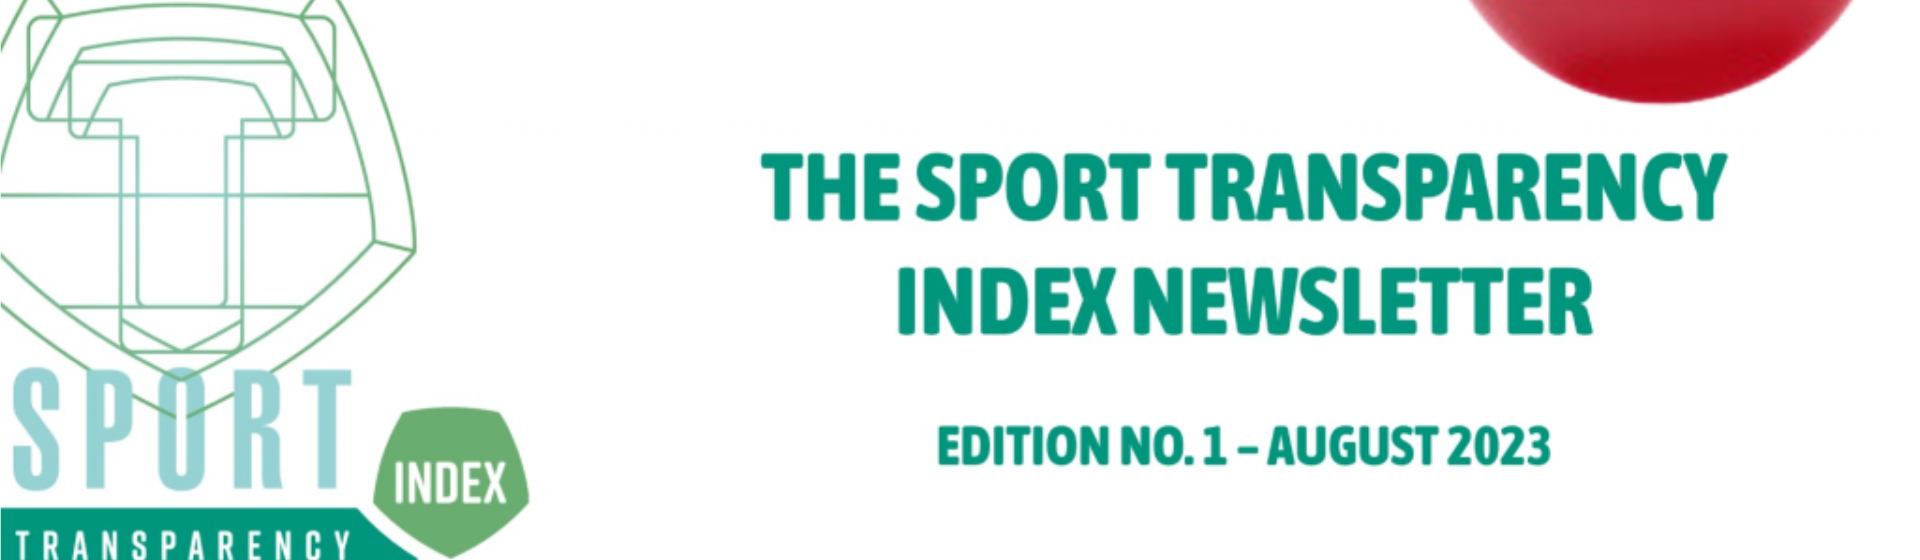 The Sport Transparency Index Newsletter – 1st Edition (Spanish) header